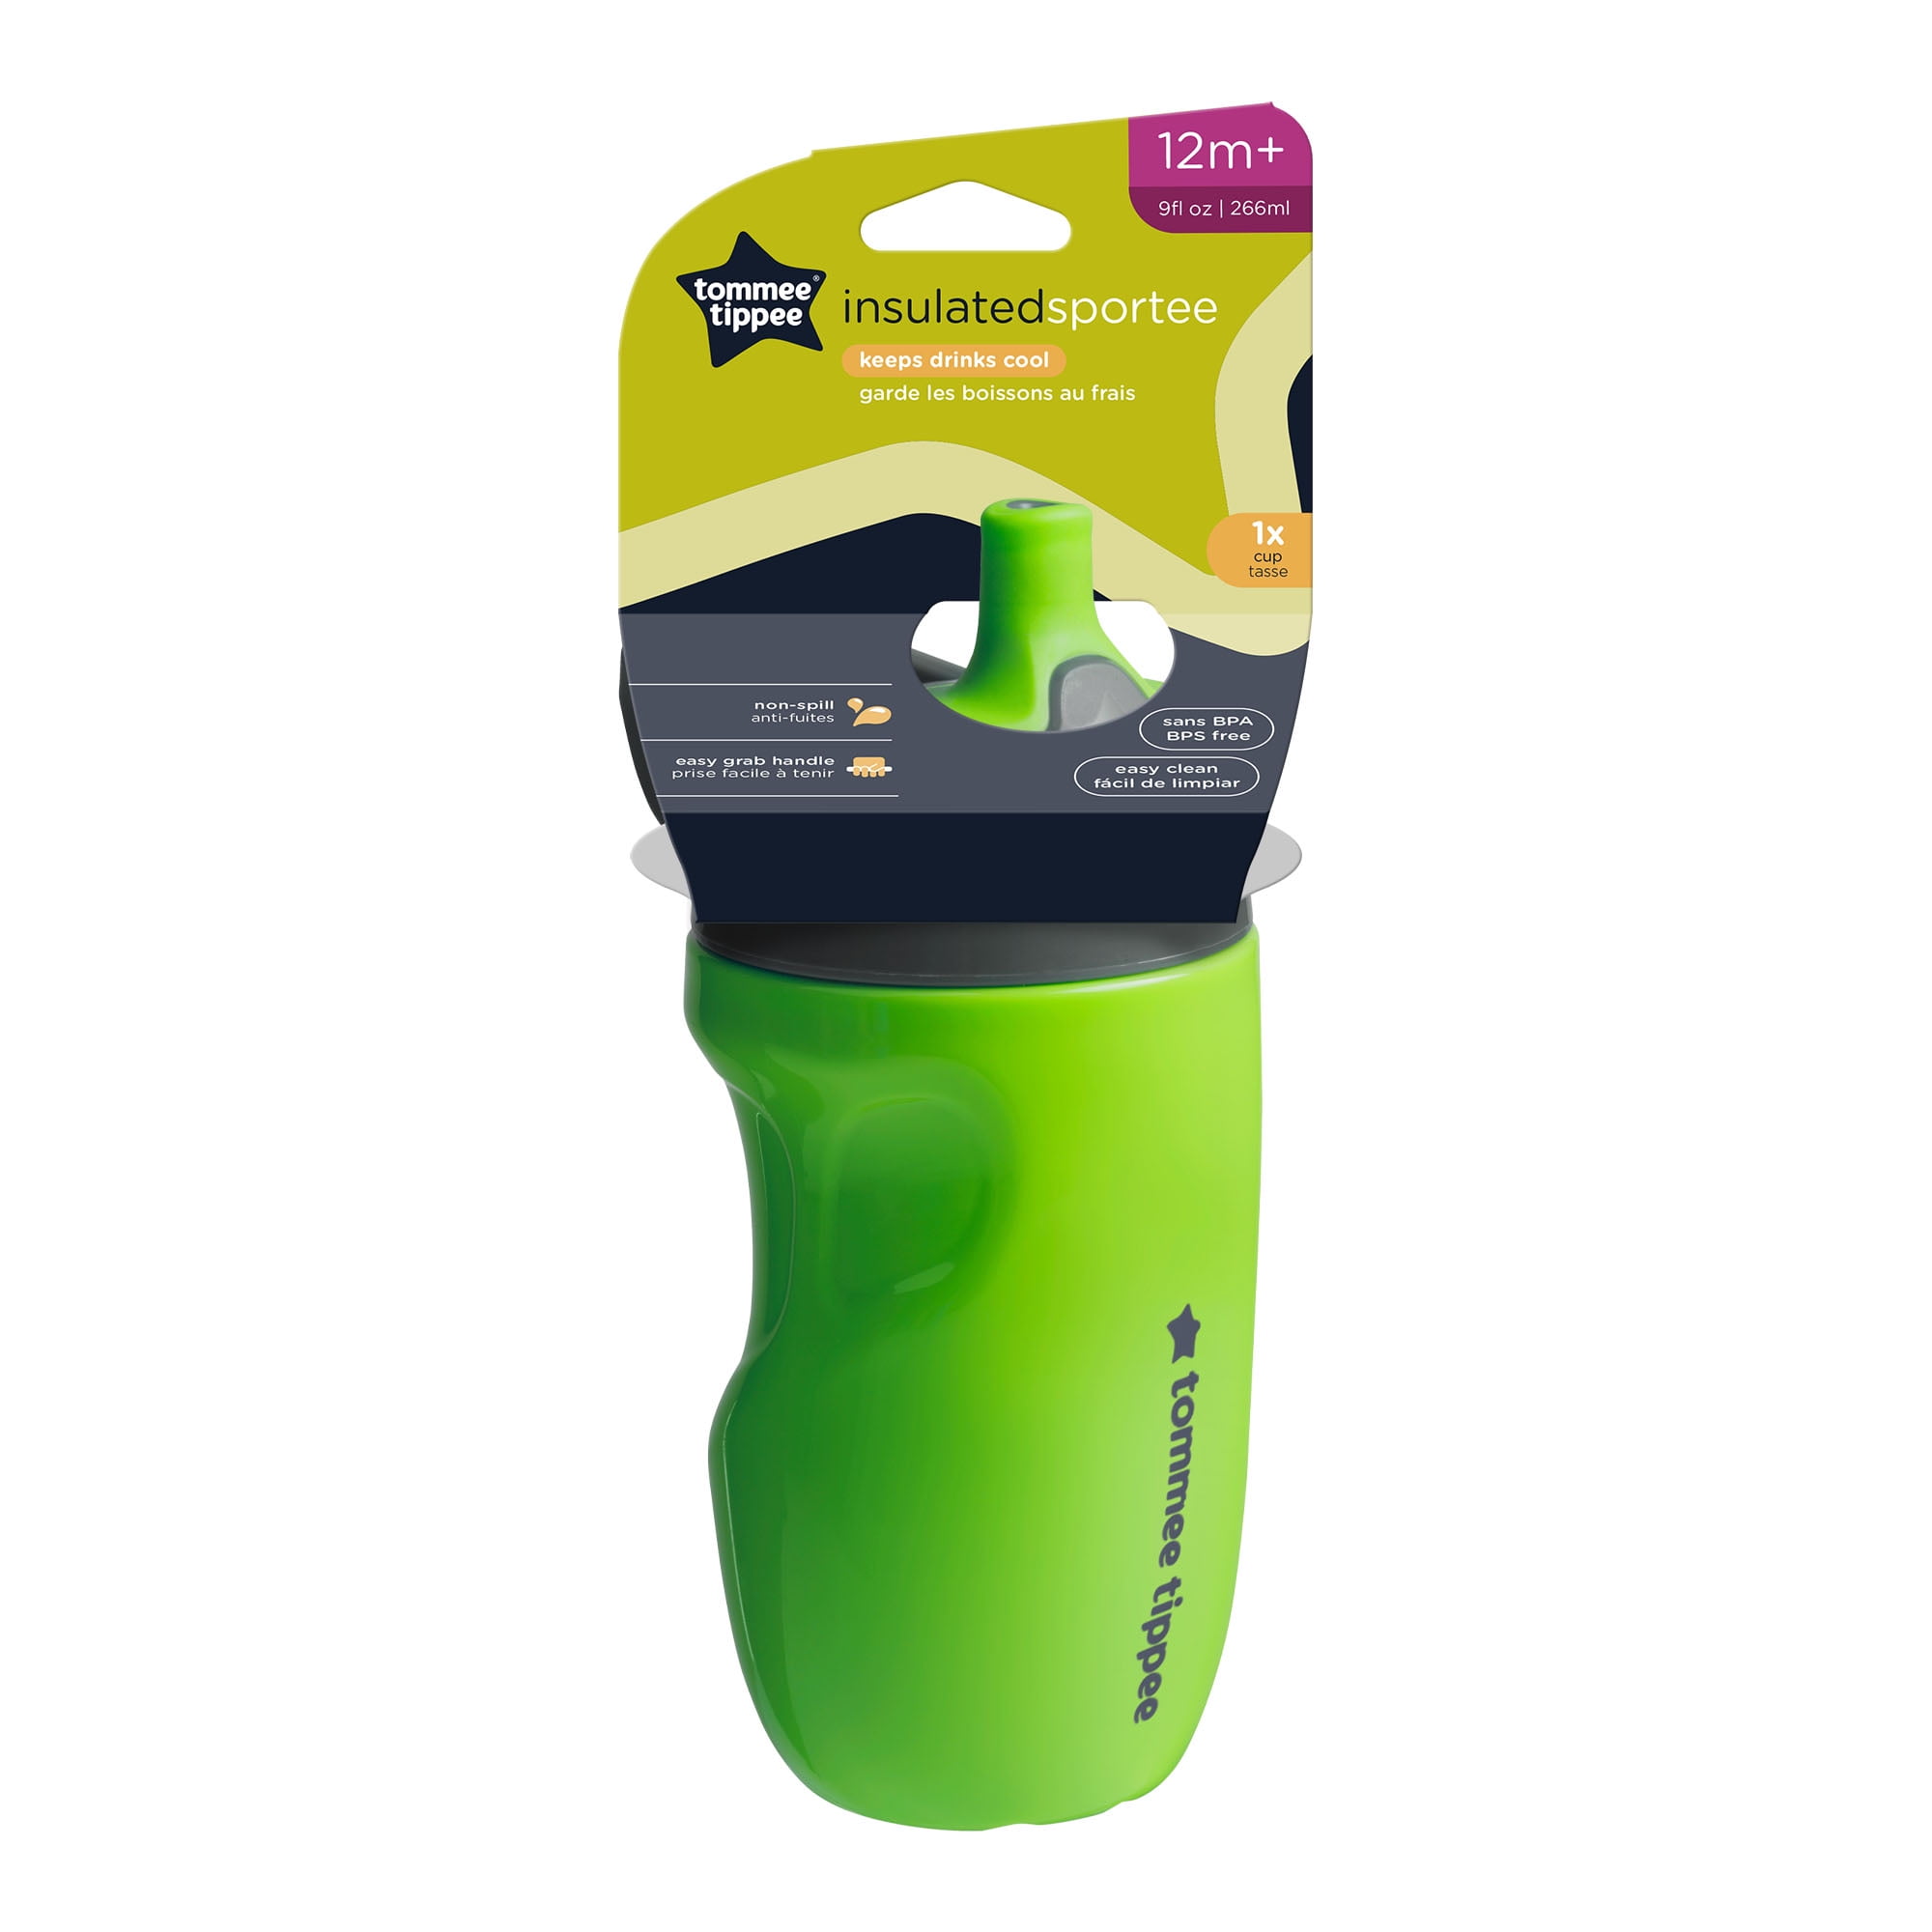 Tommee Tippee® Insulated Sportee Toddler Water Bottle with Handle, 9 oz -  Dillons Food Stores